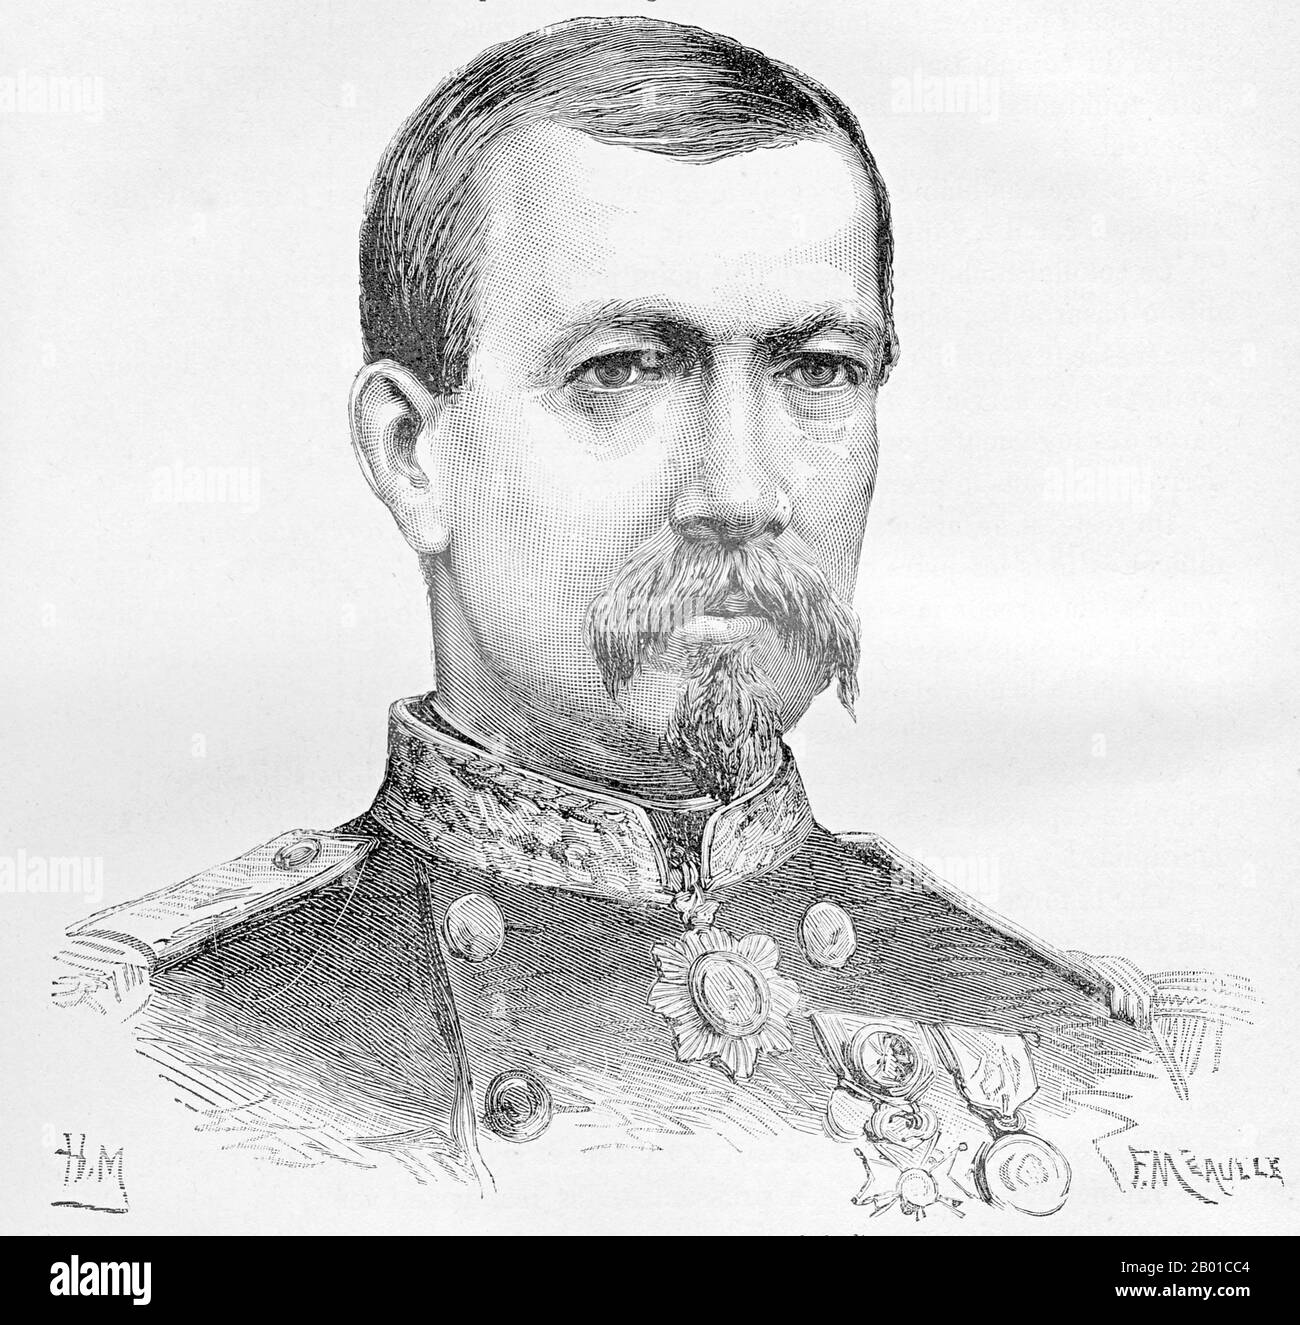 France/Vietnam: Lieutenant-Colonel Anicet-Edmond-Justin Bichot (1835-1908), from an 1883 photograph. Lithograph portrait by Charles-Lucien Huard (12 February 1837 - 22 January 1899), 1887.  The Tonkin Campaign (French: Campagne du Tonkin) was an armed conflict fought between June 1883 and April 1886 by the French against, variously, the Vietnamese, Liu Yongfu's Black Flag Army and the Chinese Guangxi and Yunnan armies to occupy Tonkin (northern Vietnam) and entrench a French protectorate there. Stock Photo